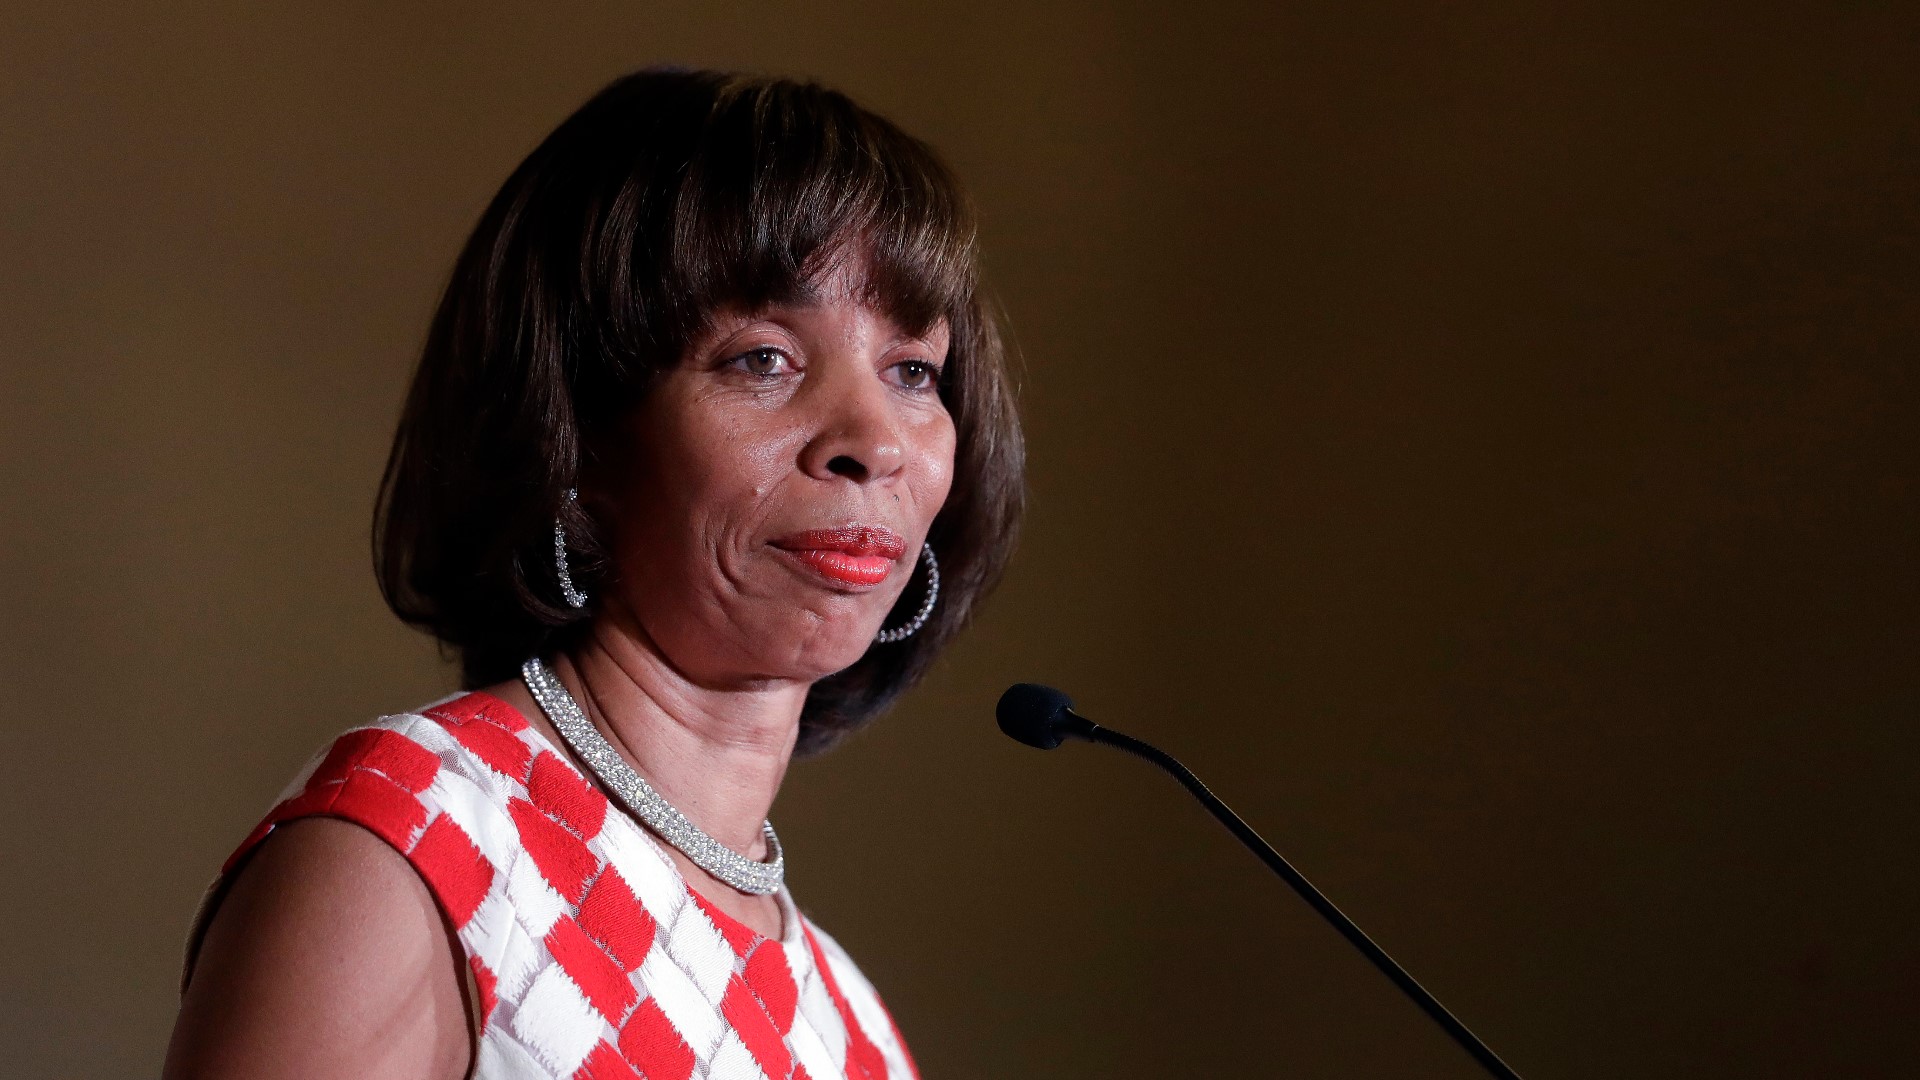 Maryland Governor Larry Hogan called for Mayor Catherine Pugh to resign hours after the FBI searched her home and City Hall.